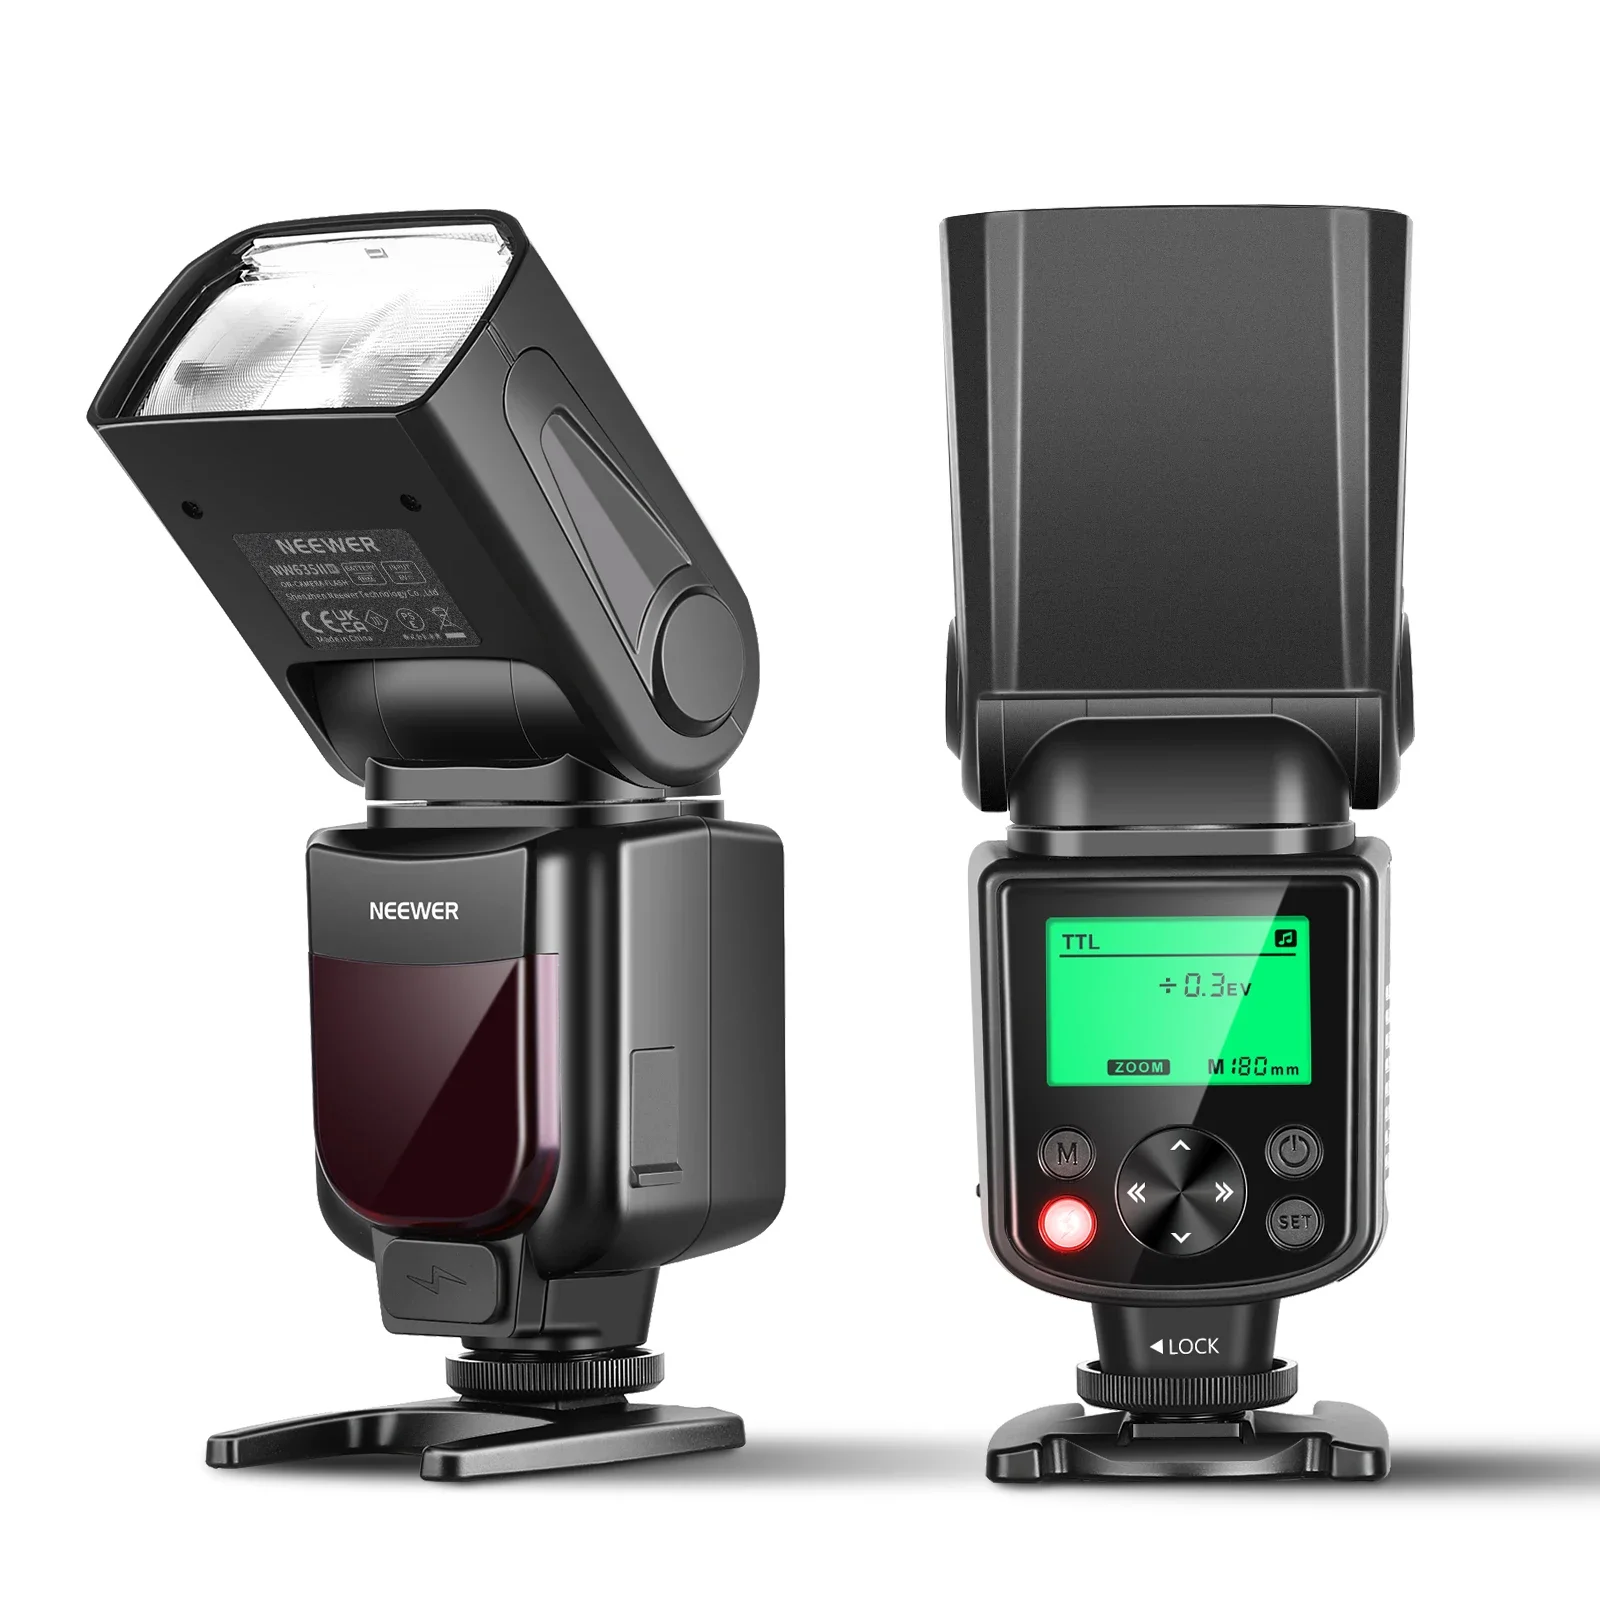 

NEEWER Upgraded NW635II-N TTL Camera Flash Speedlite With LCD Screen, Speedlight Compatible With Nikon D4 D5 D6 D90 D300 D500